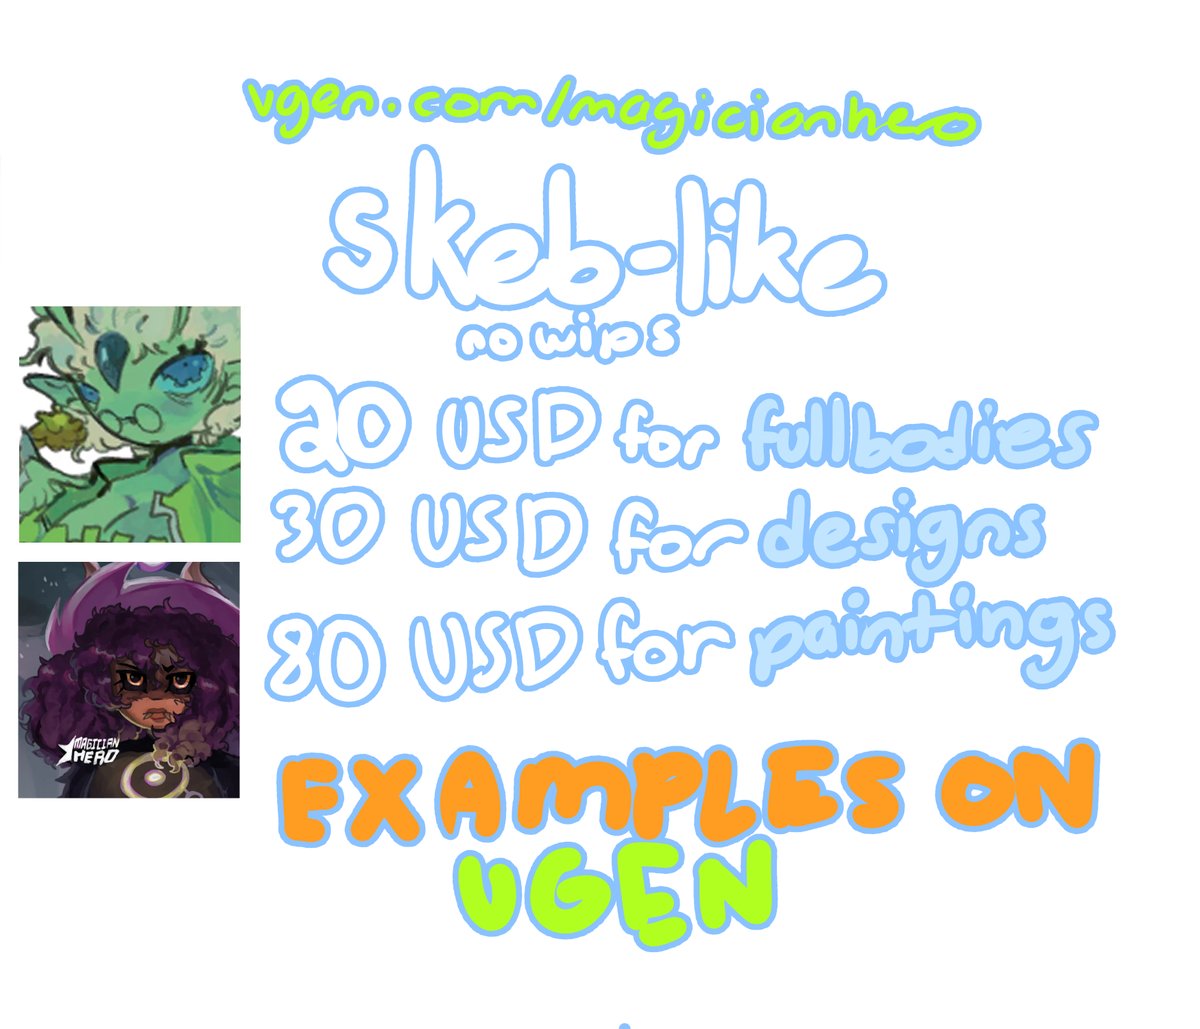 do you want 🎨 and do you have 💸!!! well im here to fix the problem for the low price of 💸you can get 🎨from me! (now with a skeb-like option)